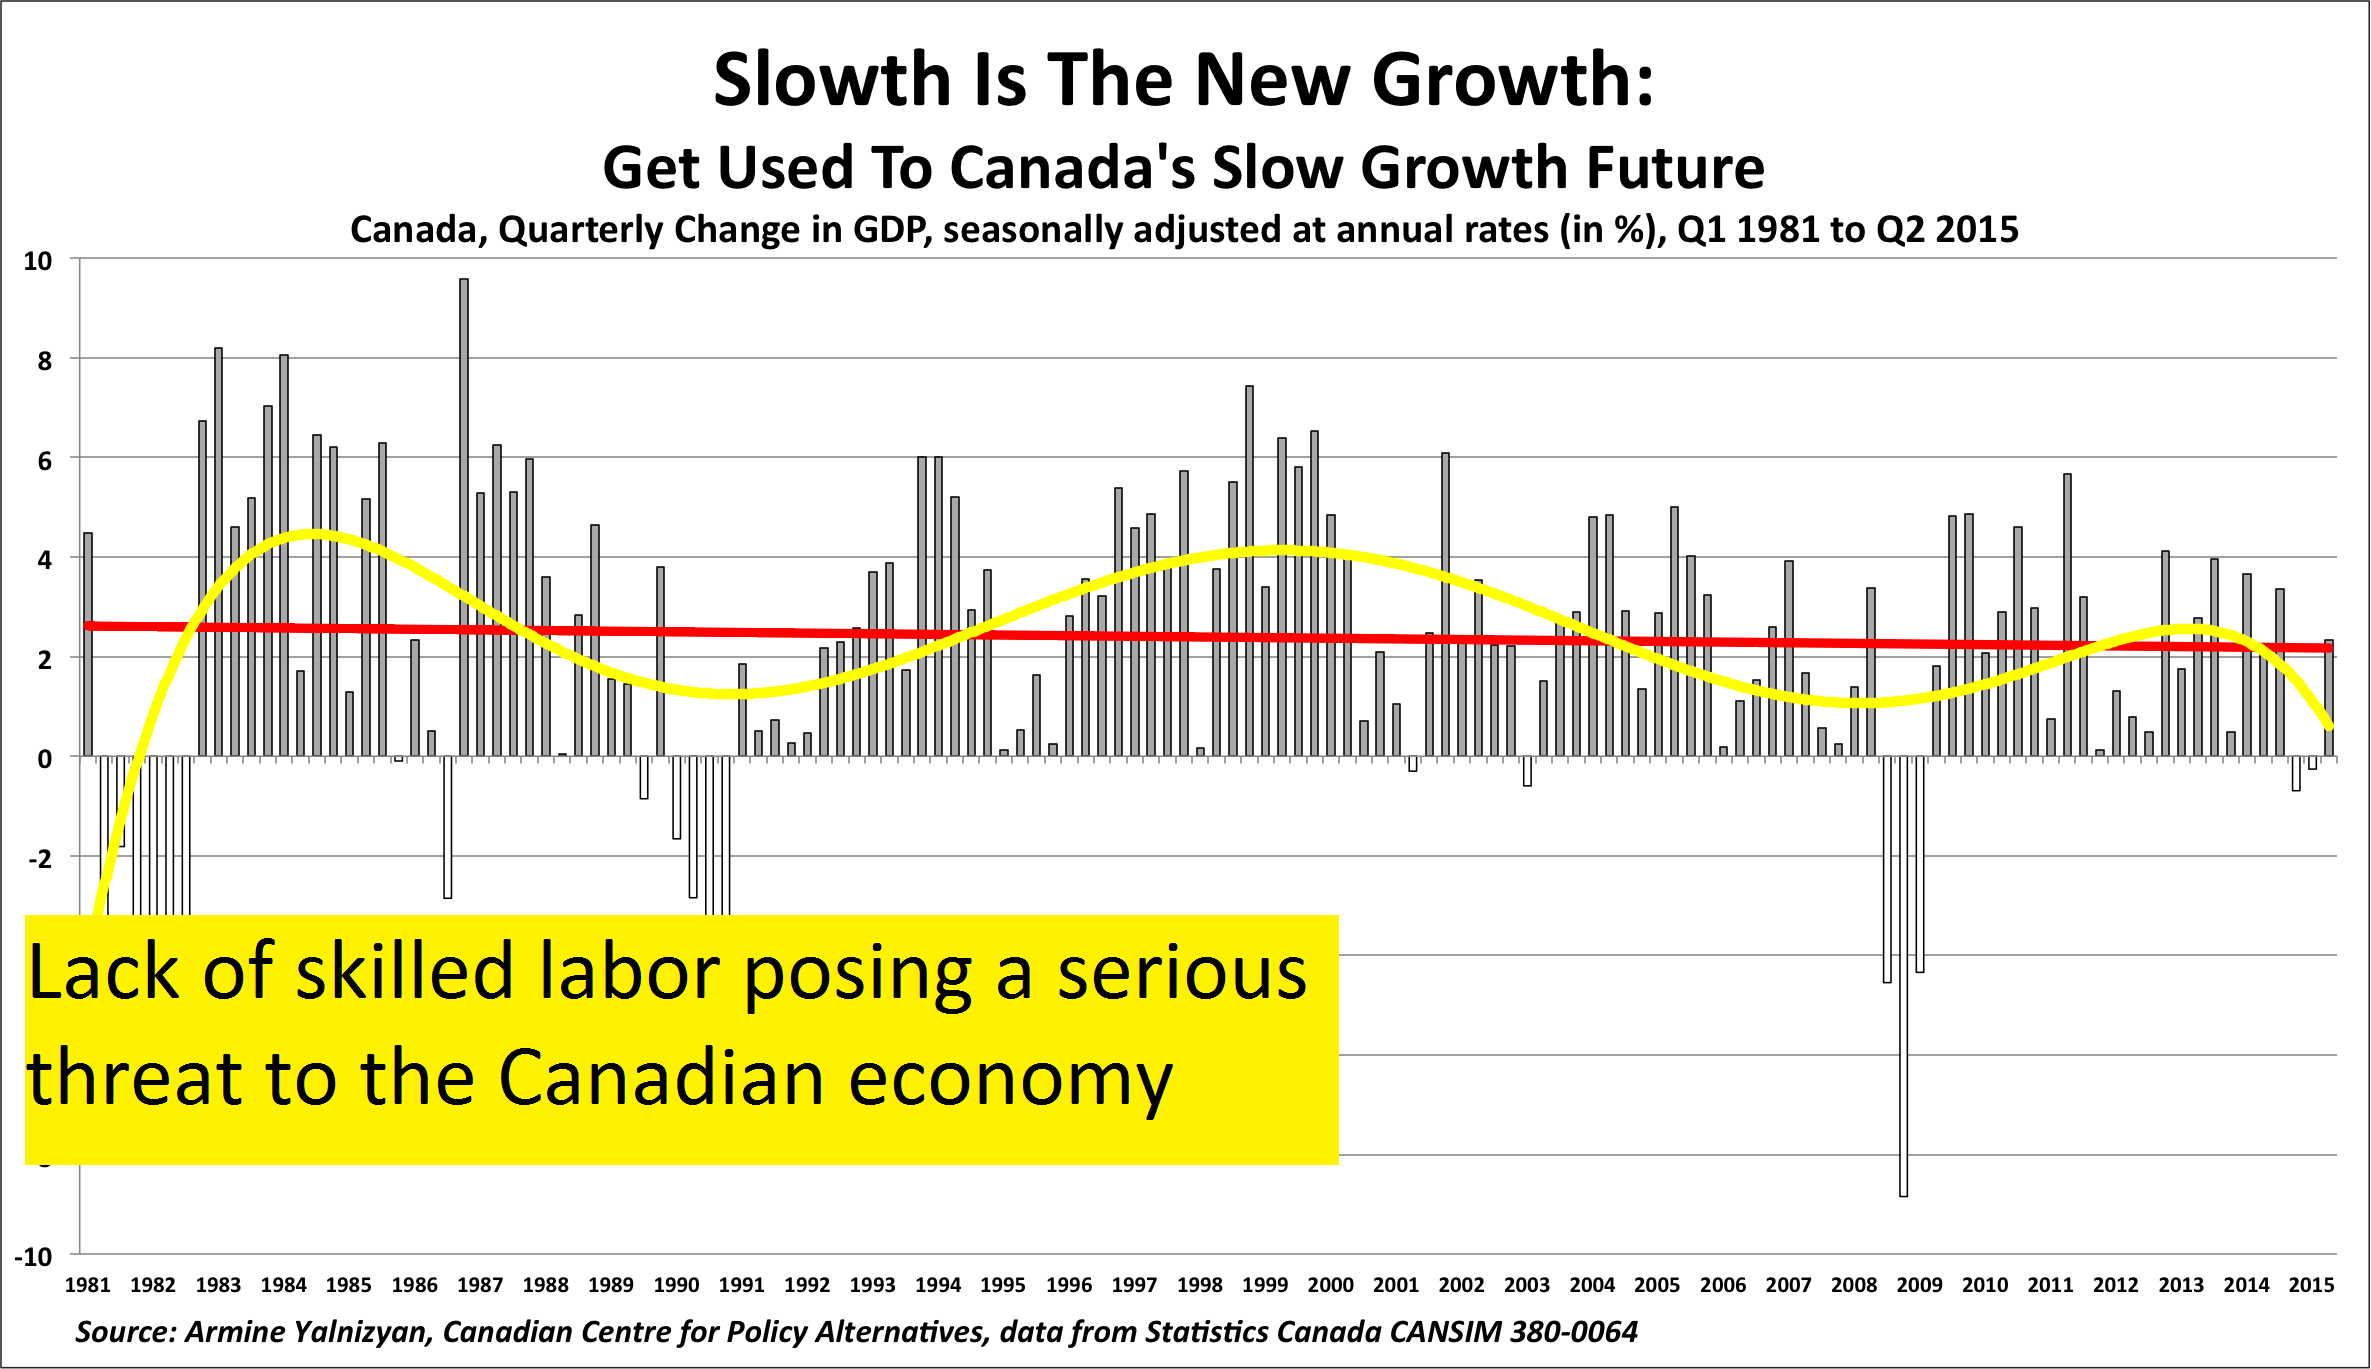 Lack of skilled labor posing a serious threat to the Canadian economy